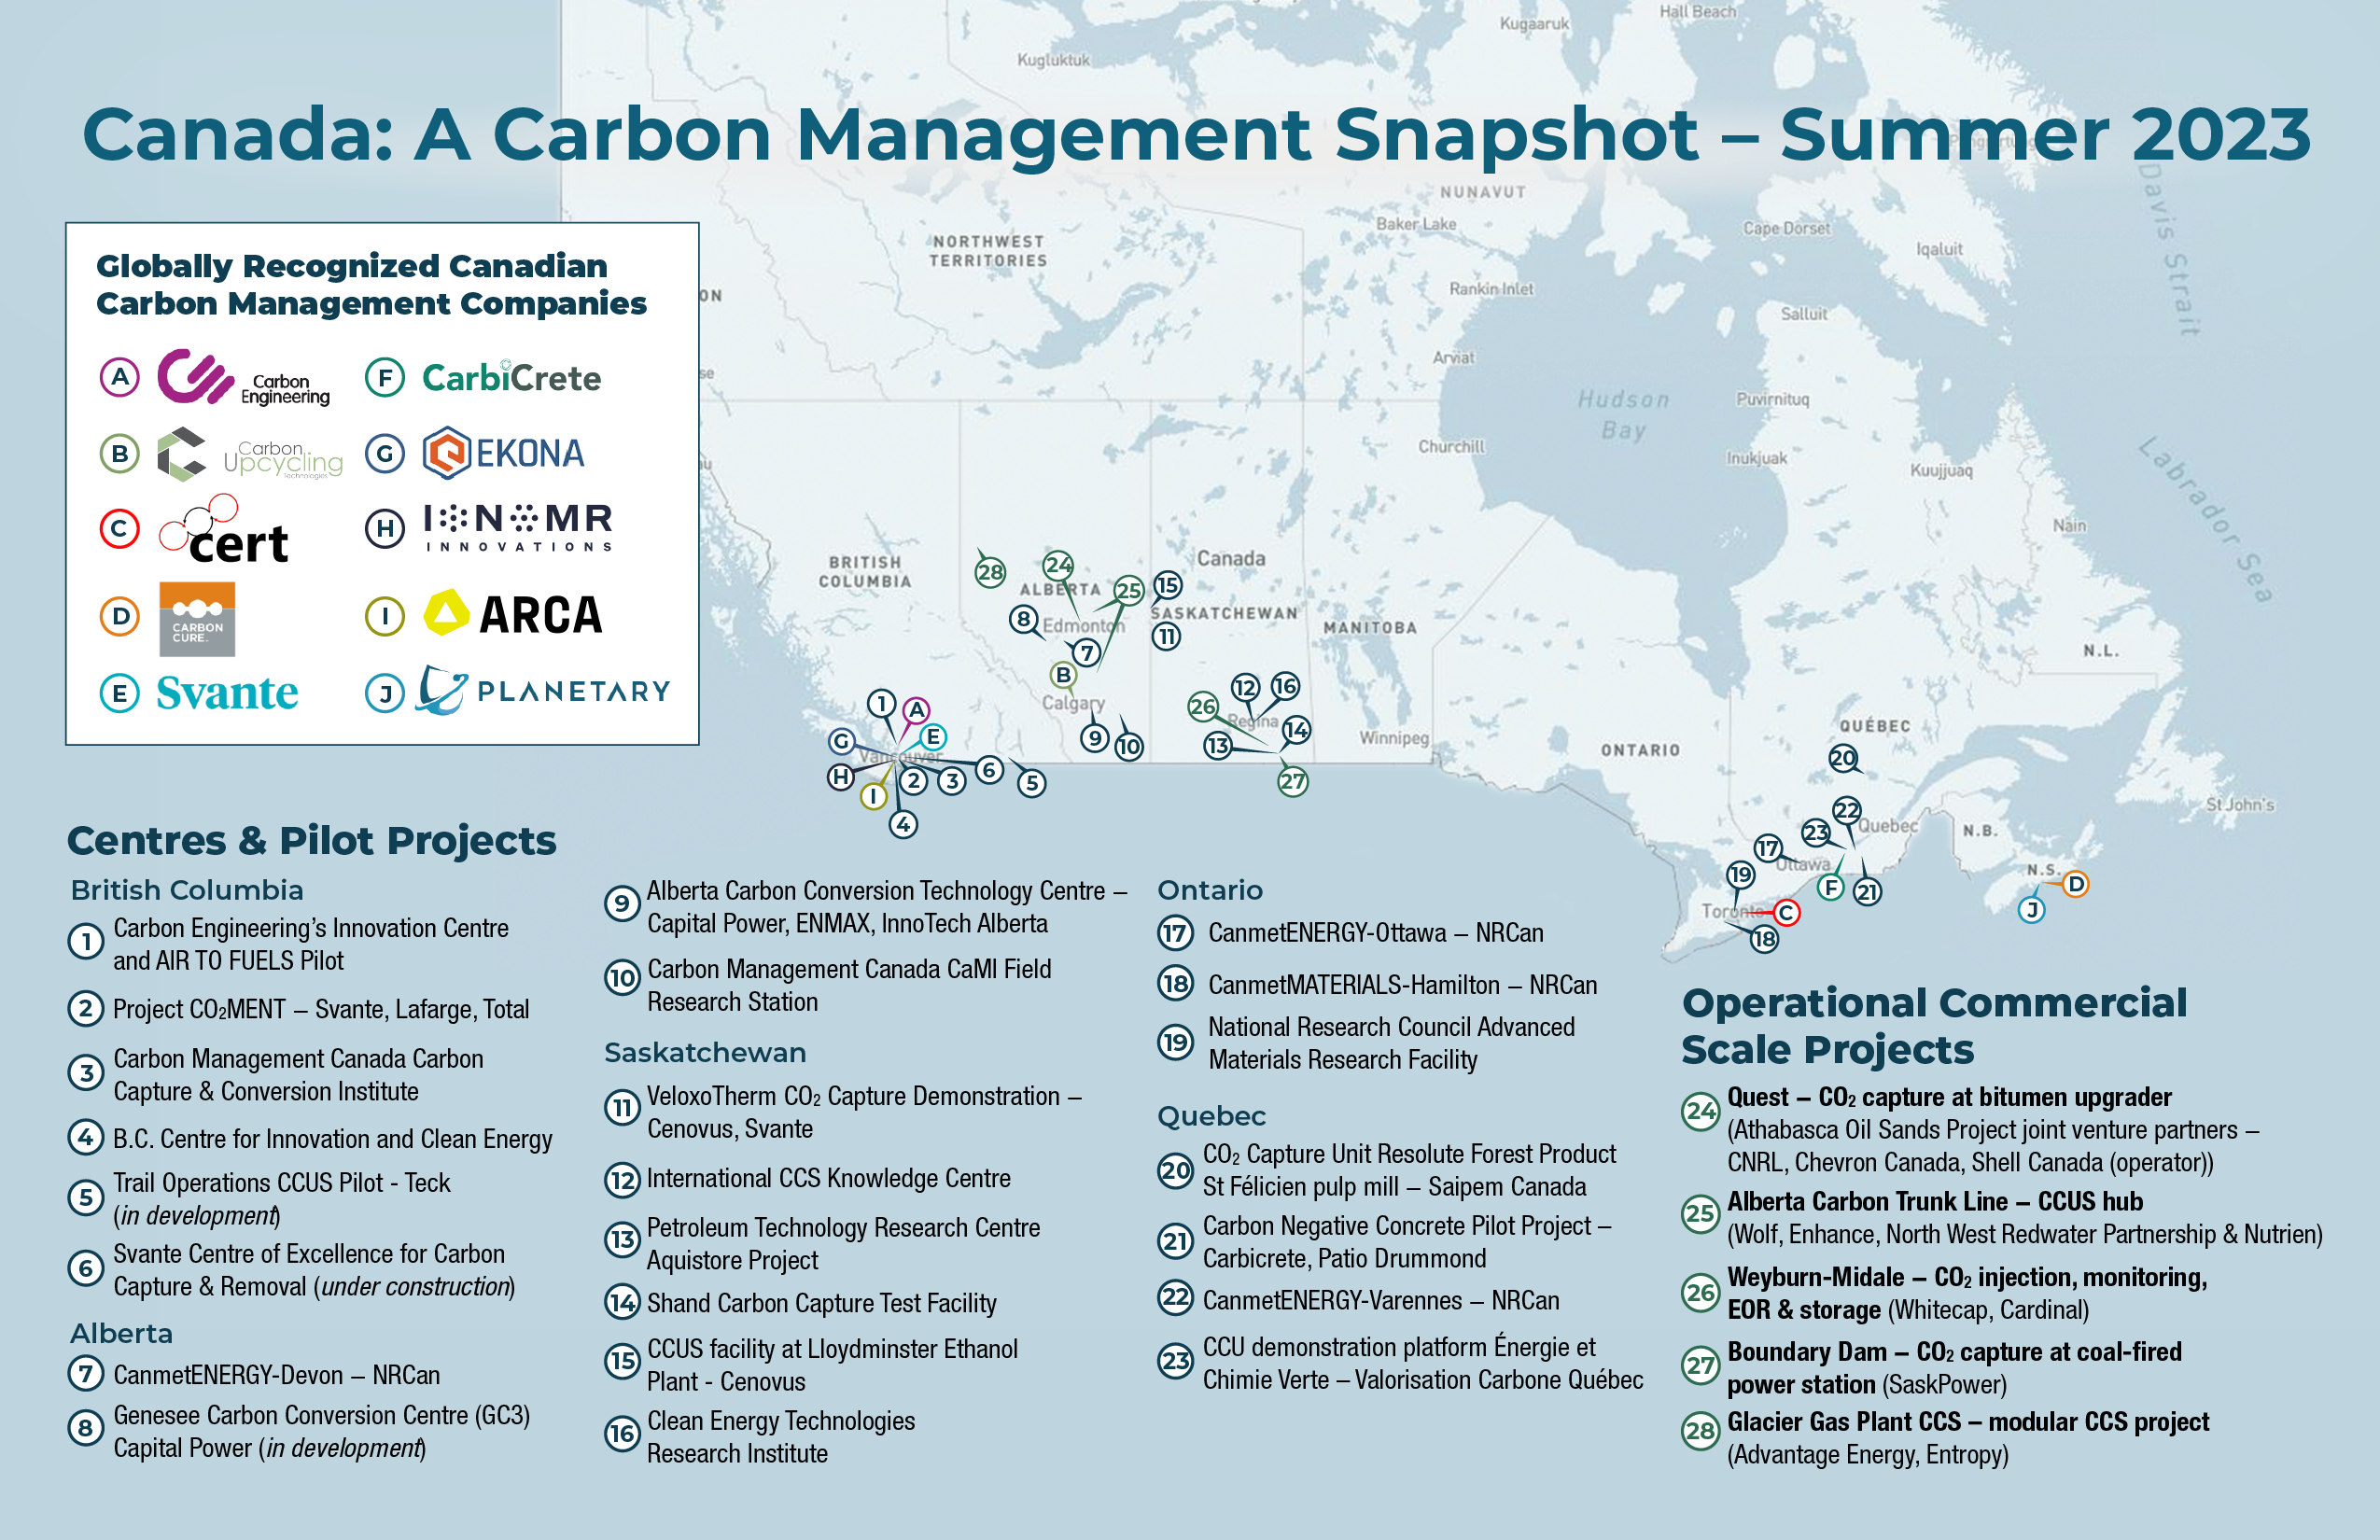 Snapshot map of Canada (last updated Summer 2023) showing the location of carbon management centres, pilot projects, operational commercial-scale projects and globally recognized Canadian carbon management companies.